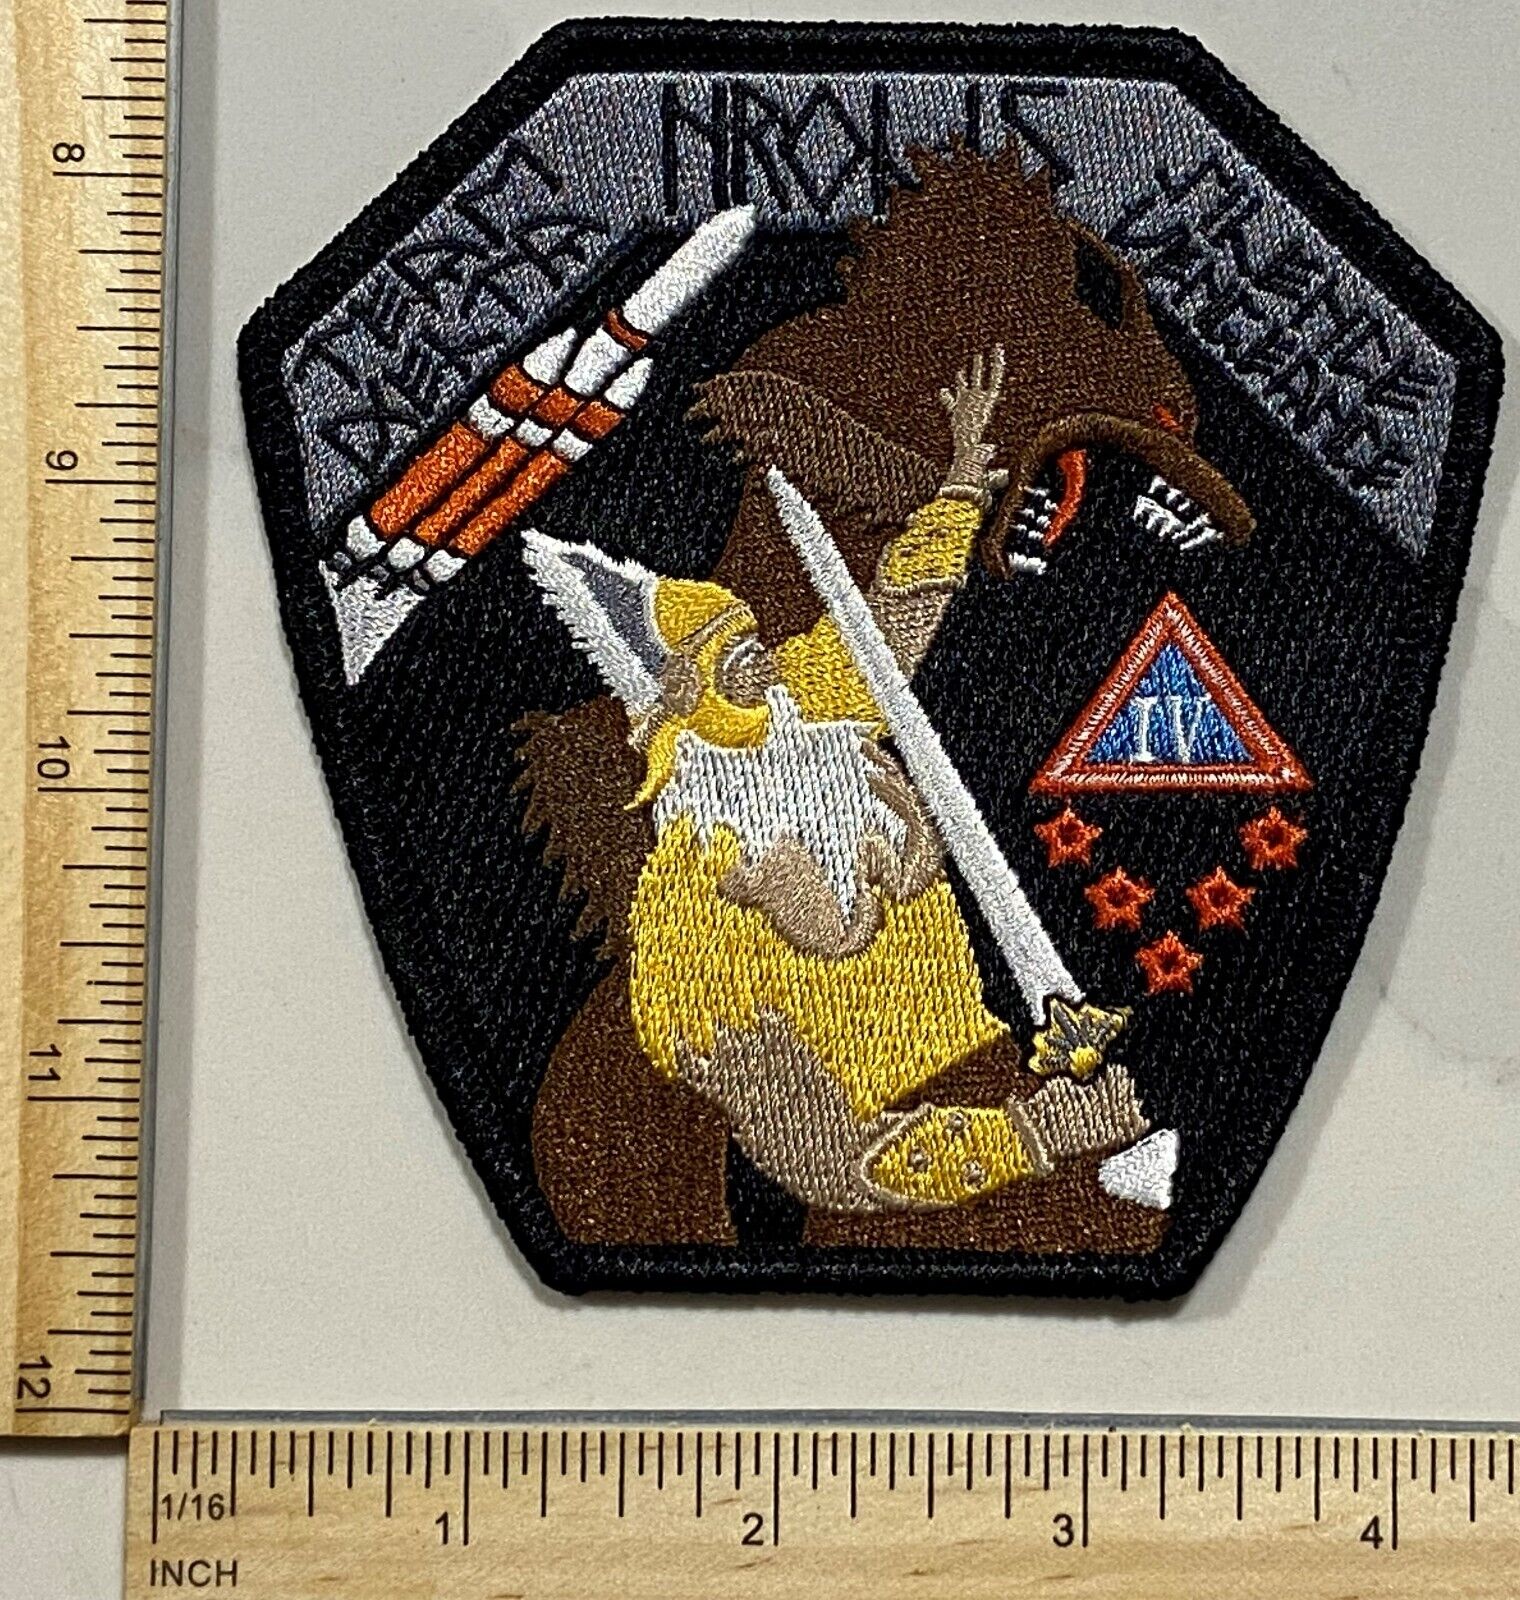 RARE MILITARY BLACK OPS NRO PATCH - NROL-15 VERSION (a) SILENCE VENGEANCE PATCH